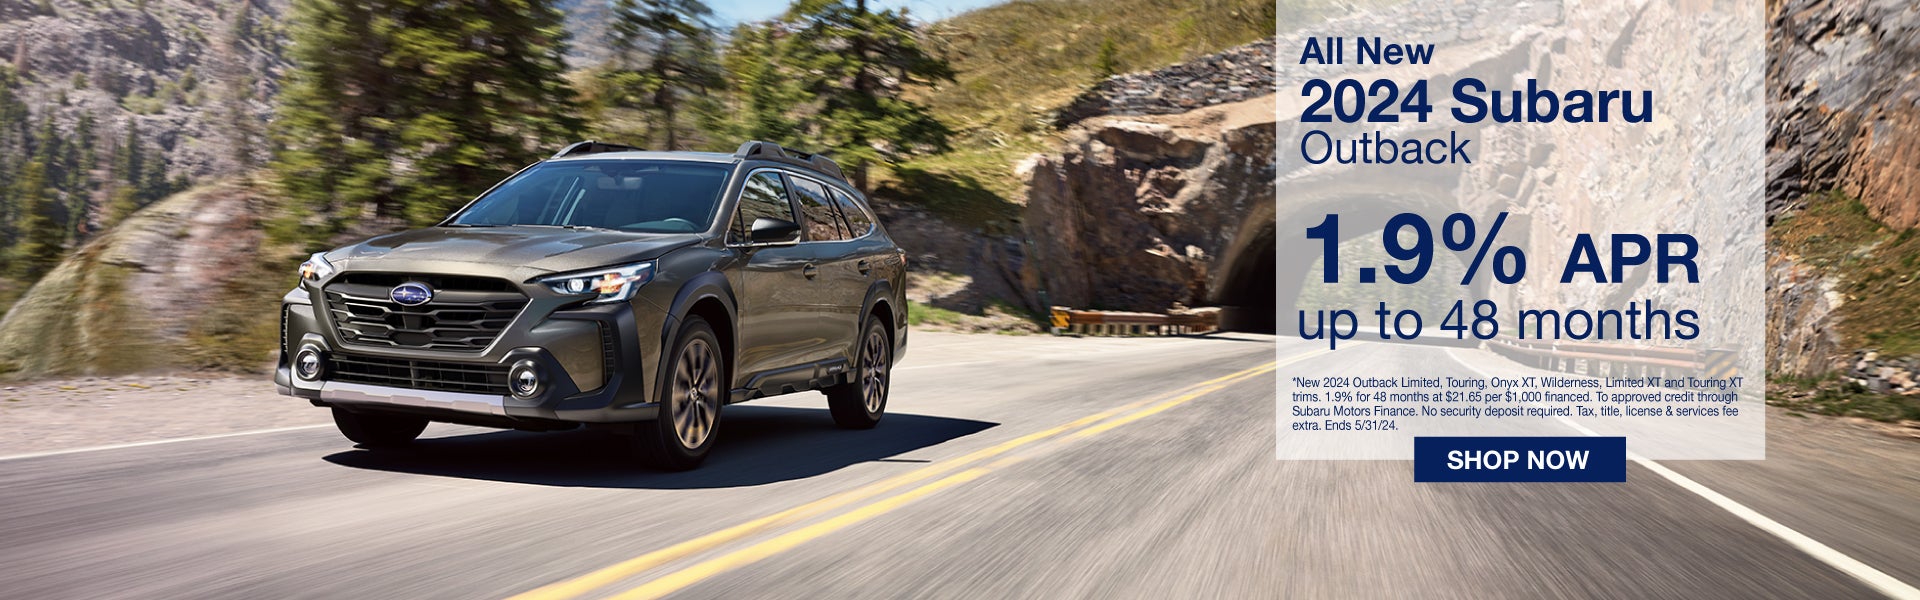 2024 Subaru Outback. 1.9% ARP up to 48 months.